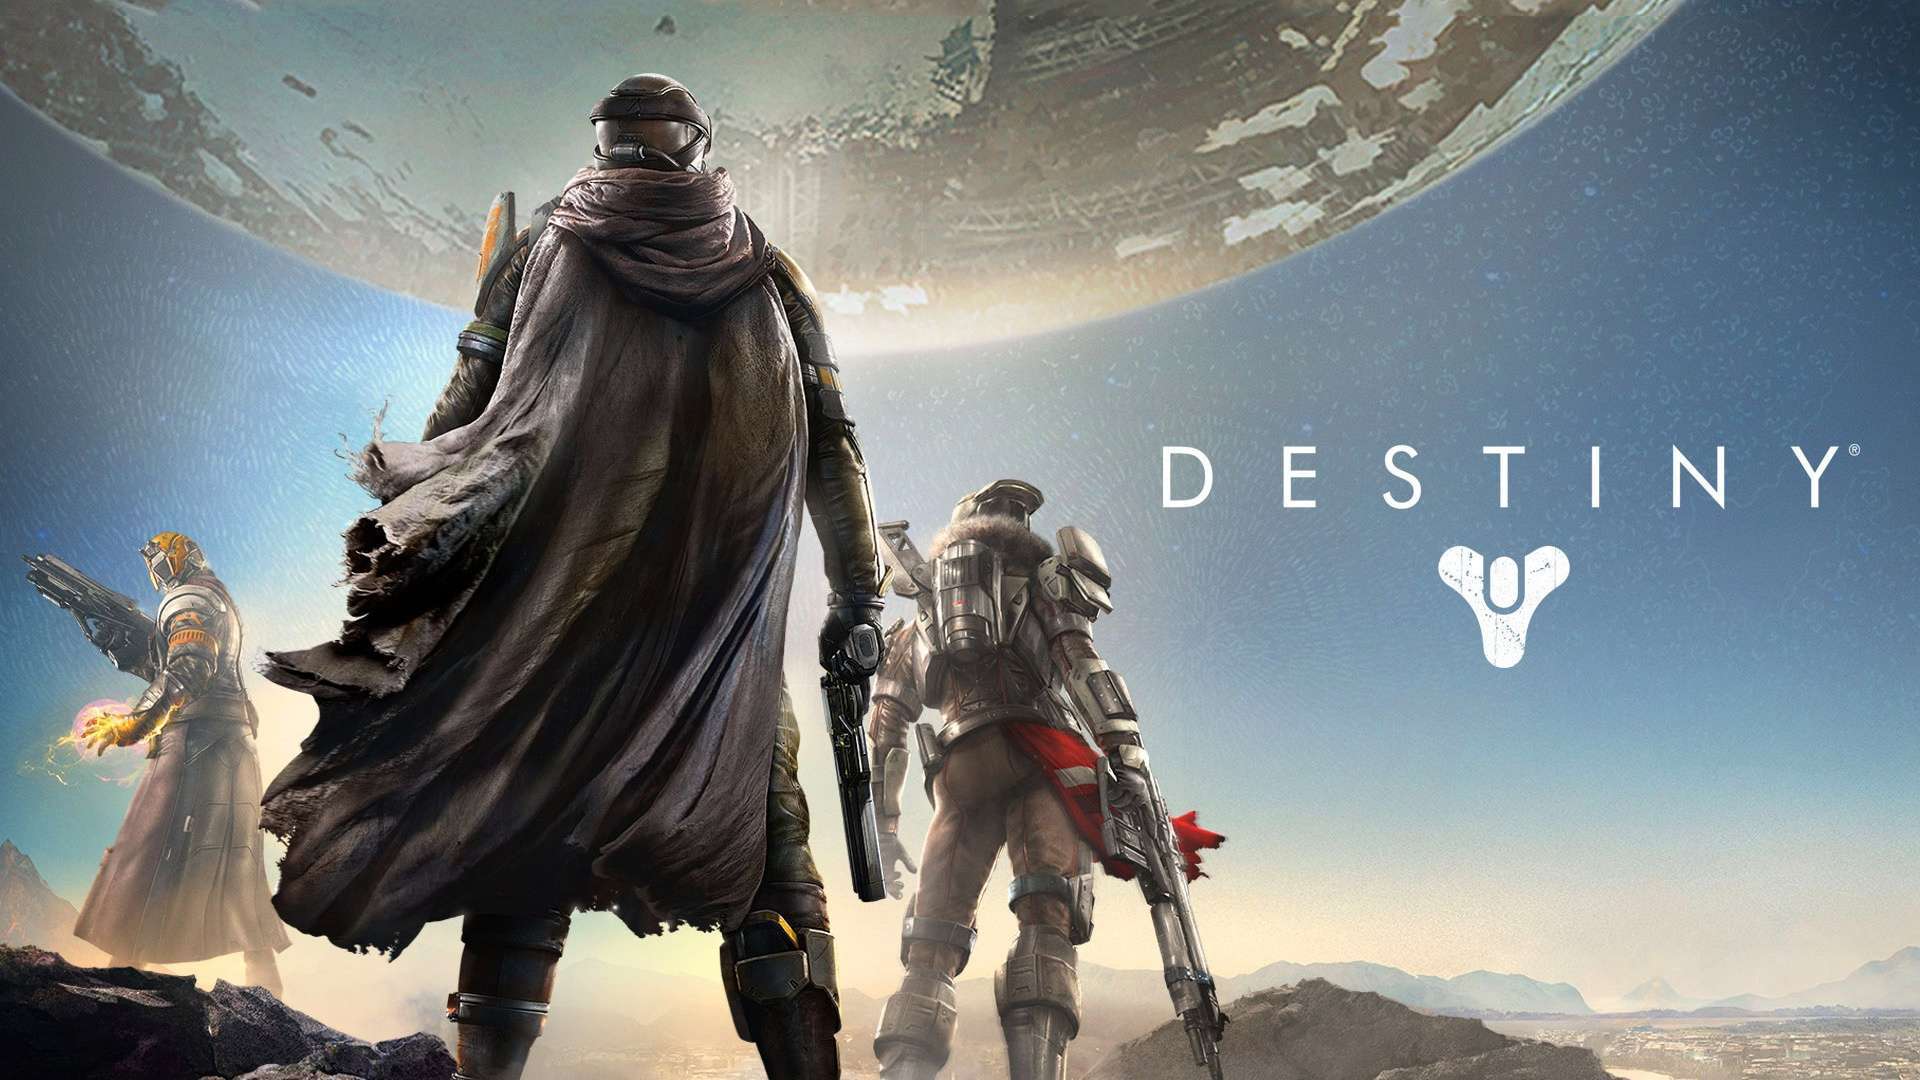 Wallpaper Destiny Game HD 1080p Upload At March